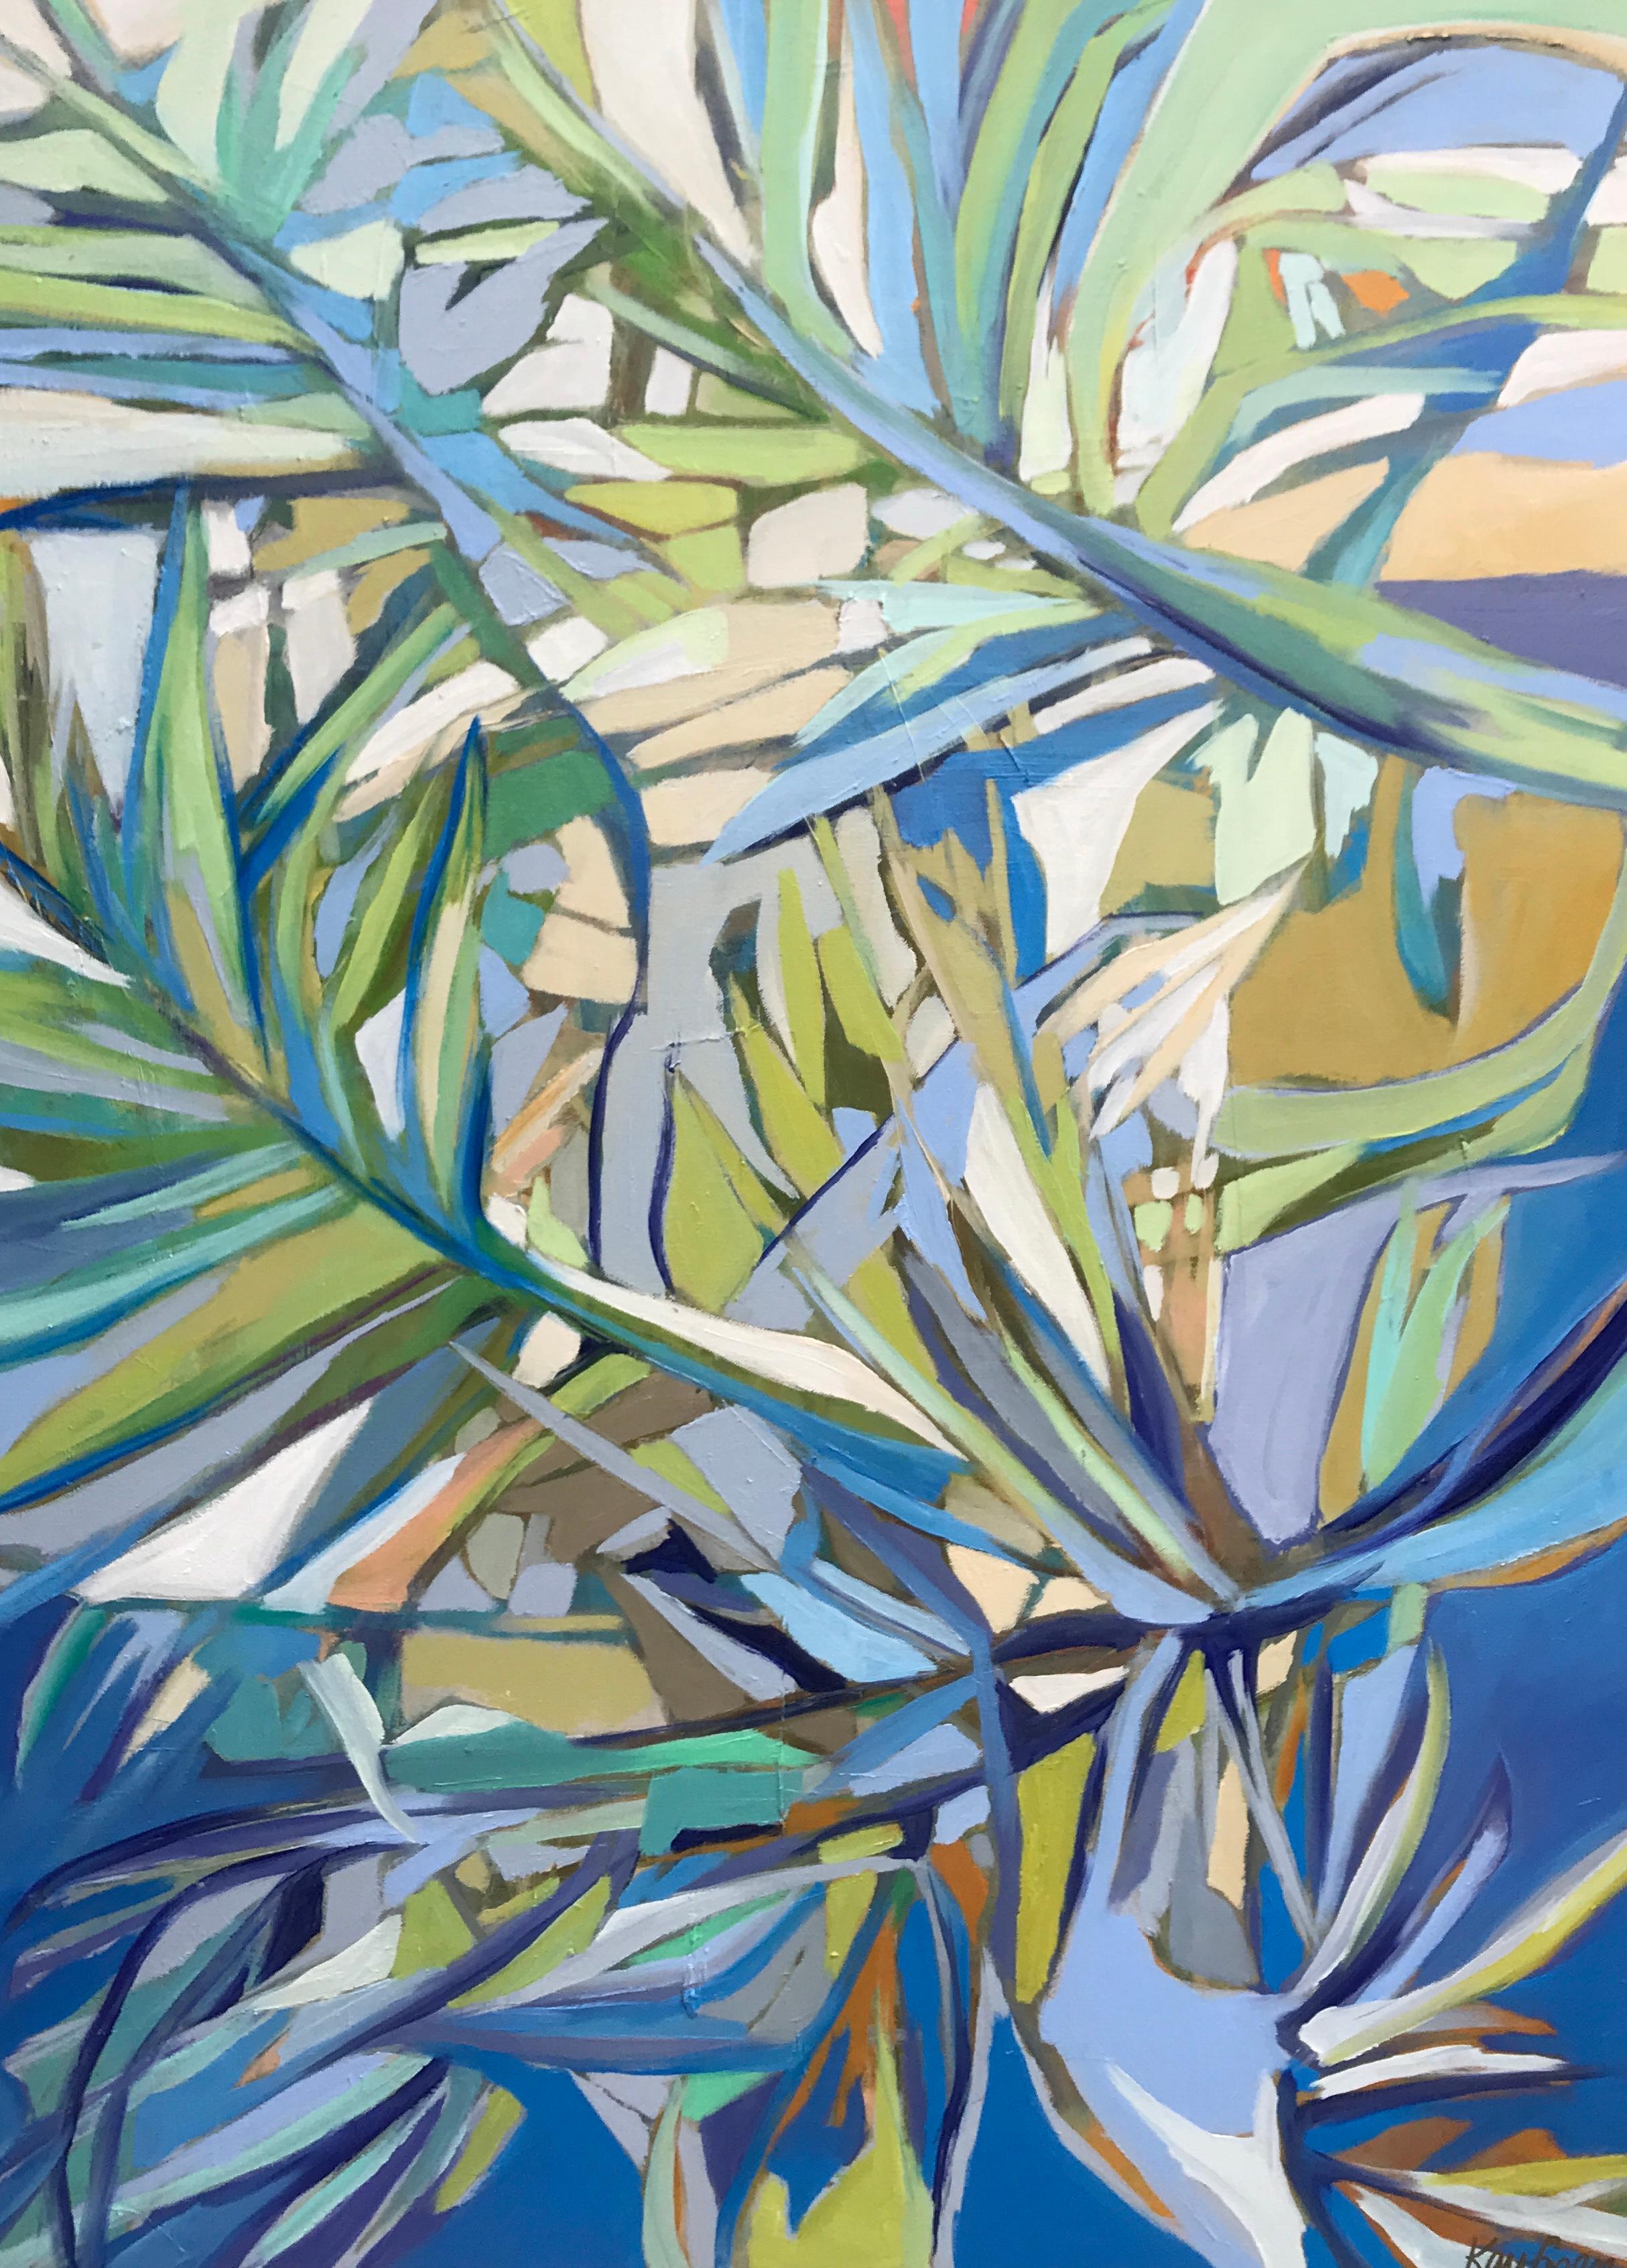 'Coastal Palm' is a medium size contemporary  framed oil and wax on canvas still-life painting created by American artist Kelli Kaufman in 2018. Featuring a vivid palette mostly made of blue, green, purple, yellow and orange tonalities, this